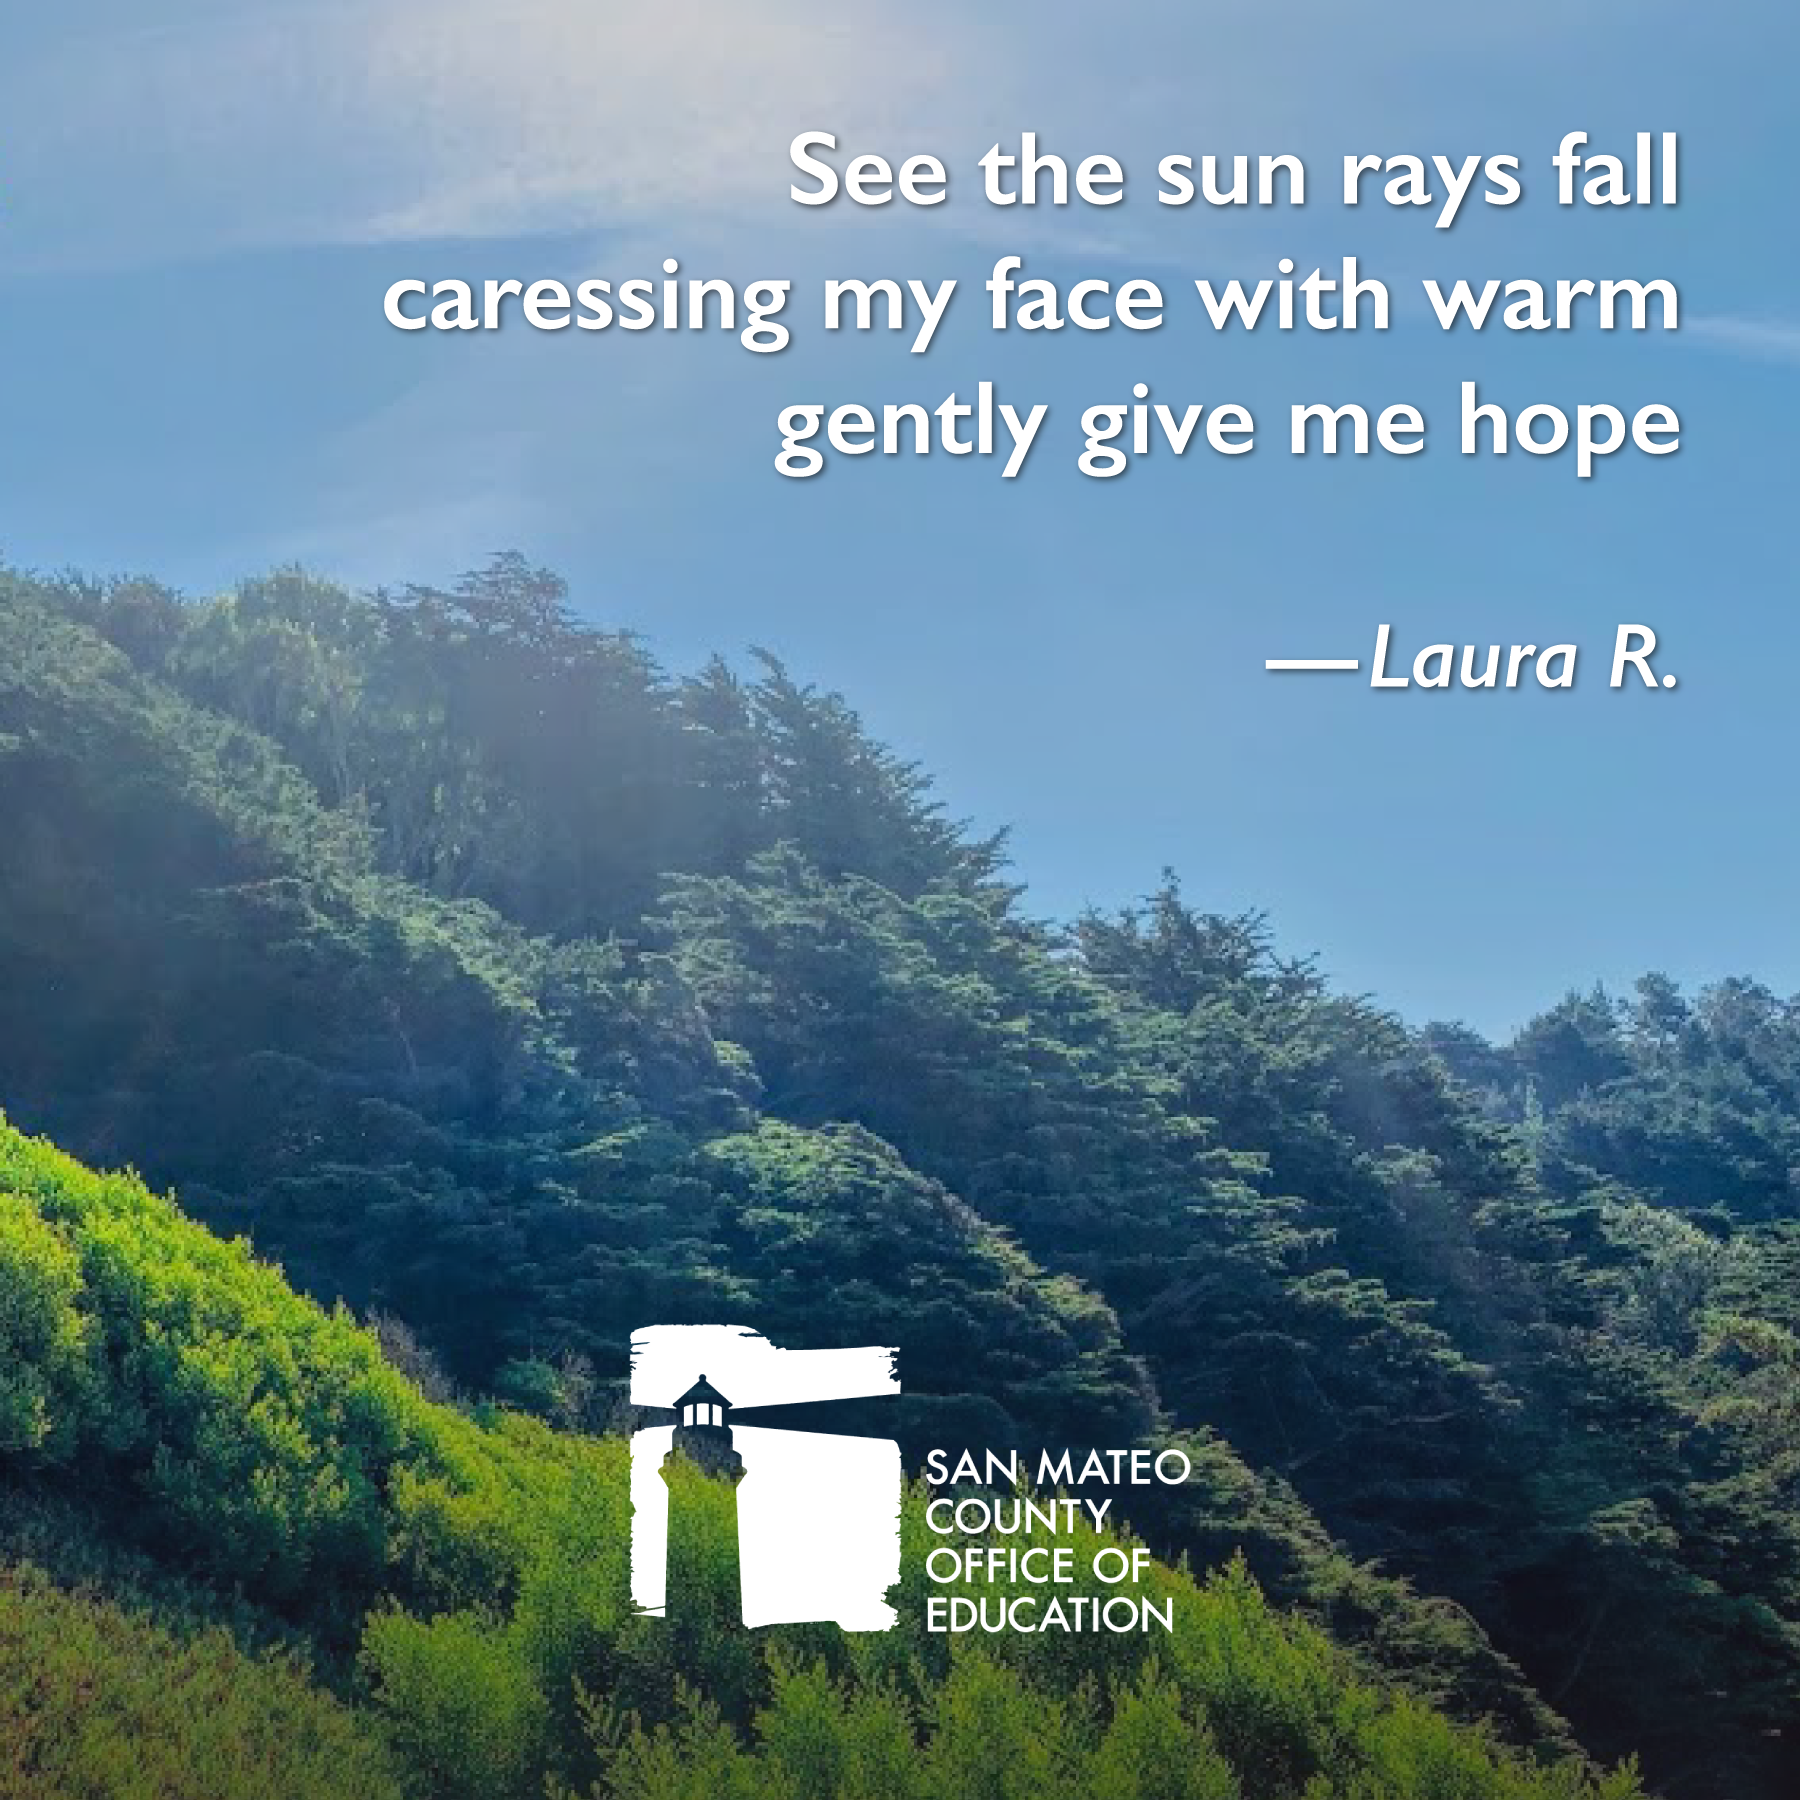 See the sun rays fall caressing my face with warm gently give me hope. Written by Lauren R.